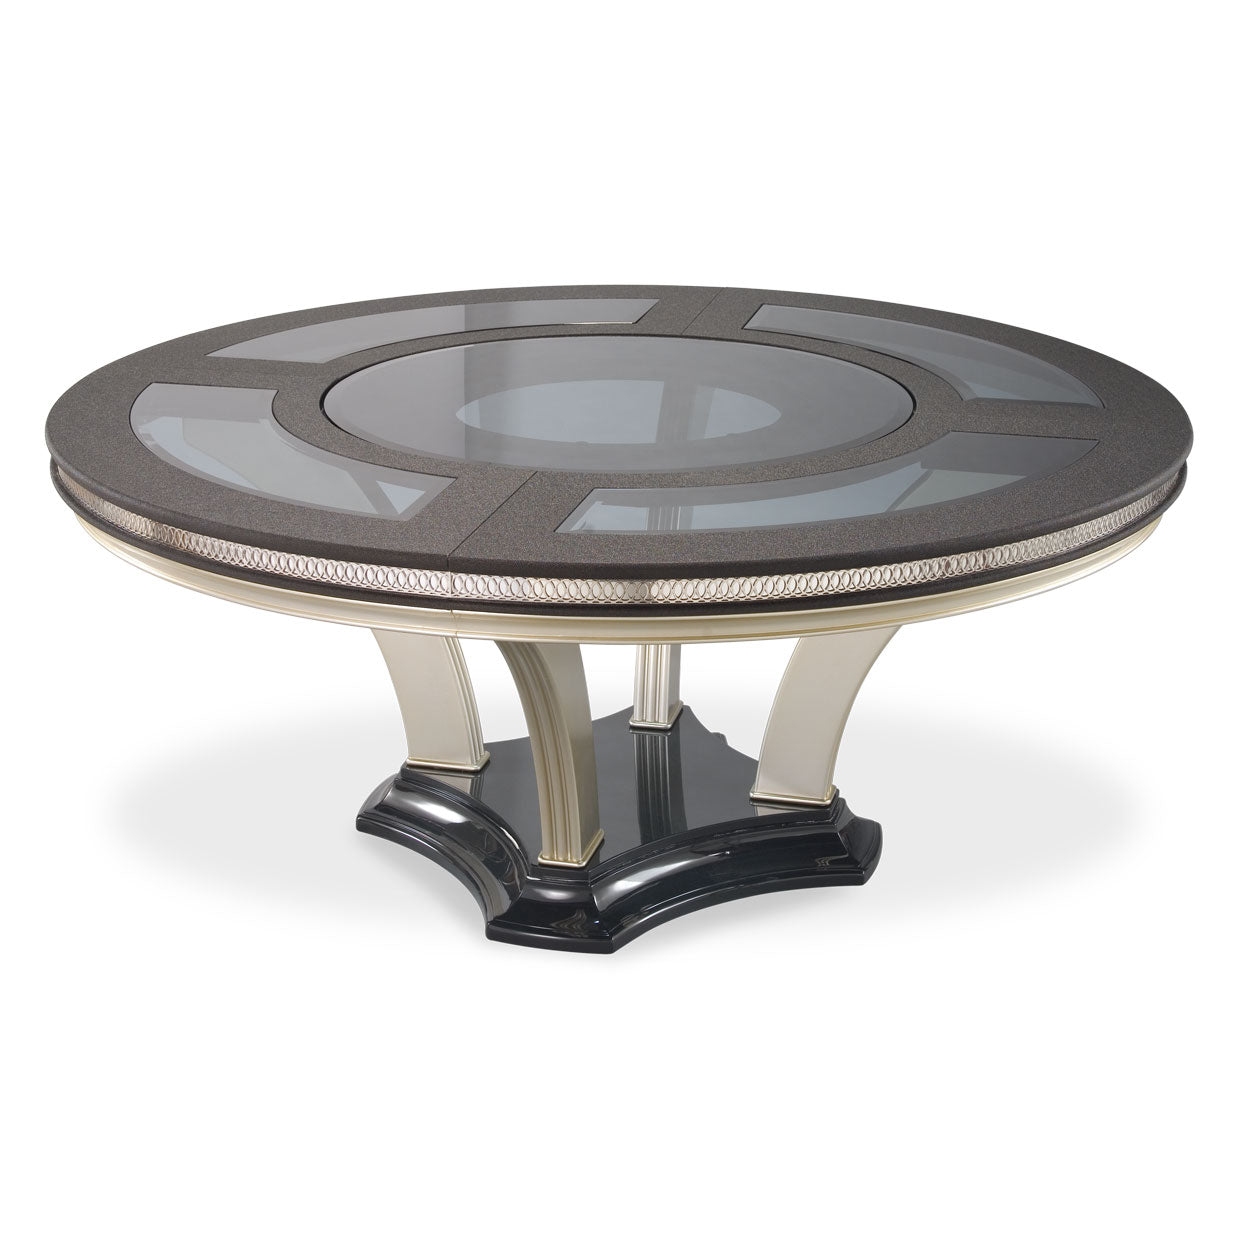 HOLLYWOOD SWANK Round Dining Table - Dreamart Gallery